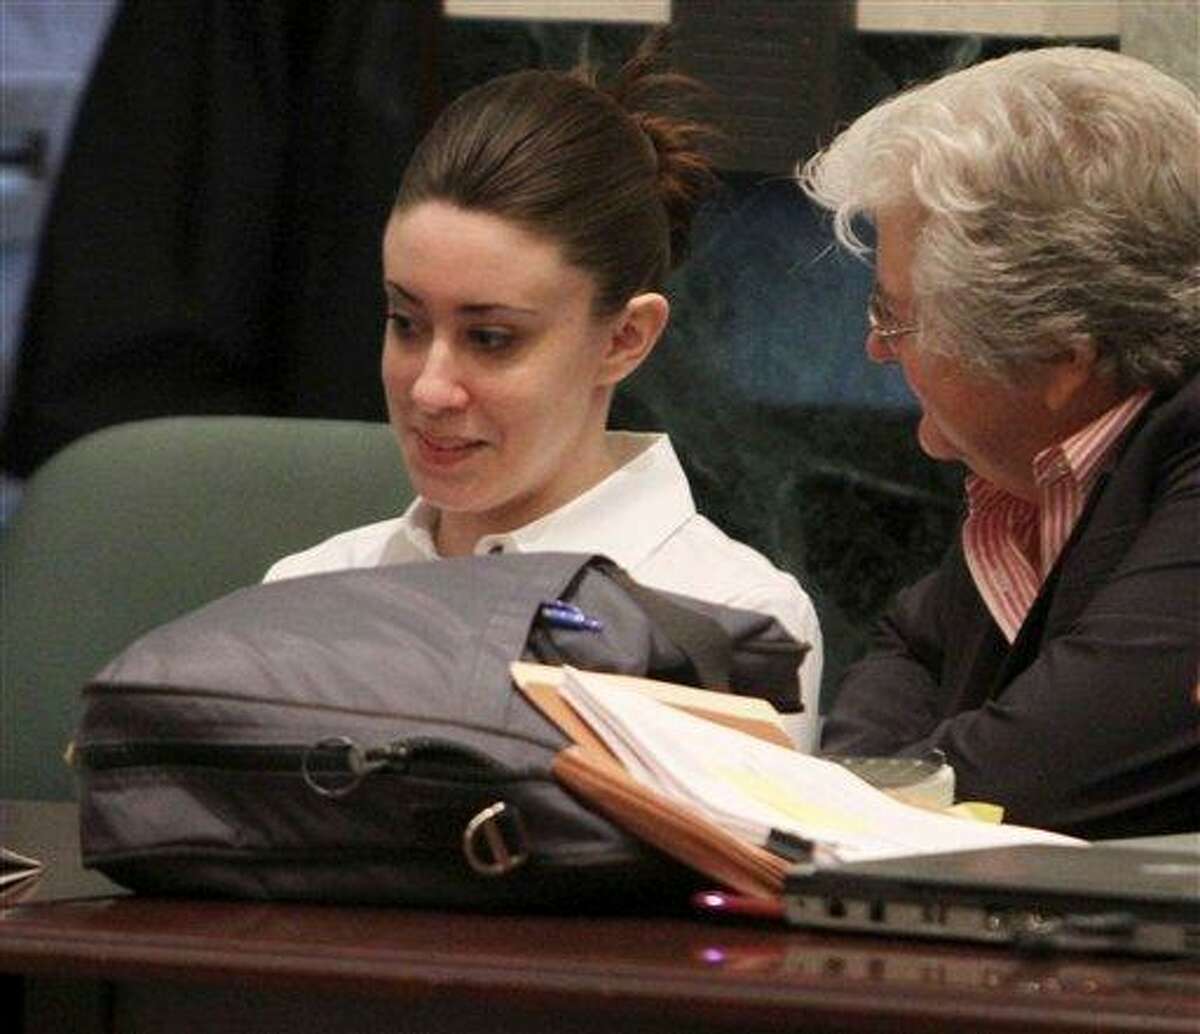 Casey Anthony, left, listens to her attorney Anne Finnell before the start of court in her murder trial at the Orange County Courthouse in Orlando, Fla. on Monday, June 27, 2011. Anthony, 25, is charged with the murder of her 2-year old daughter in 2008.(AP Photo/Red Huber,Pool)